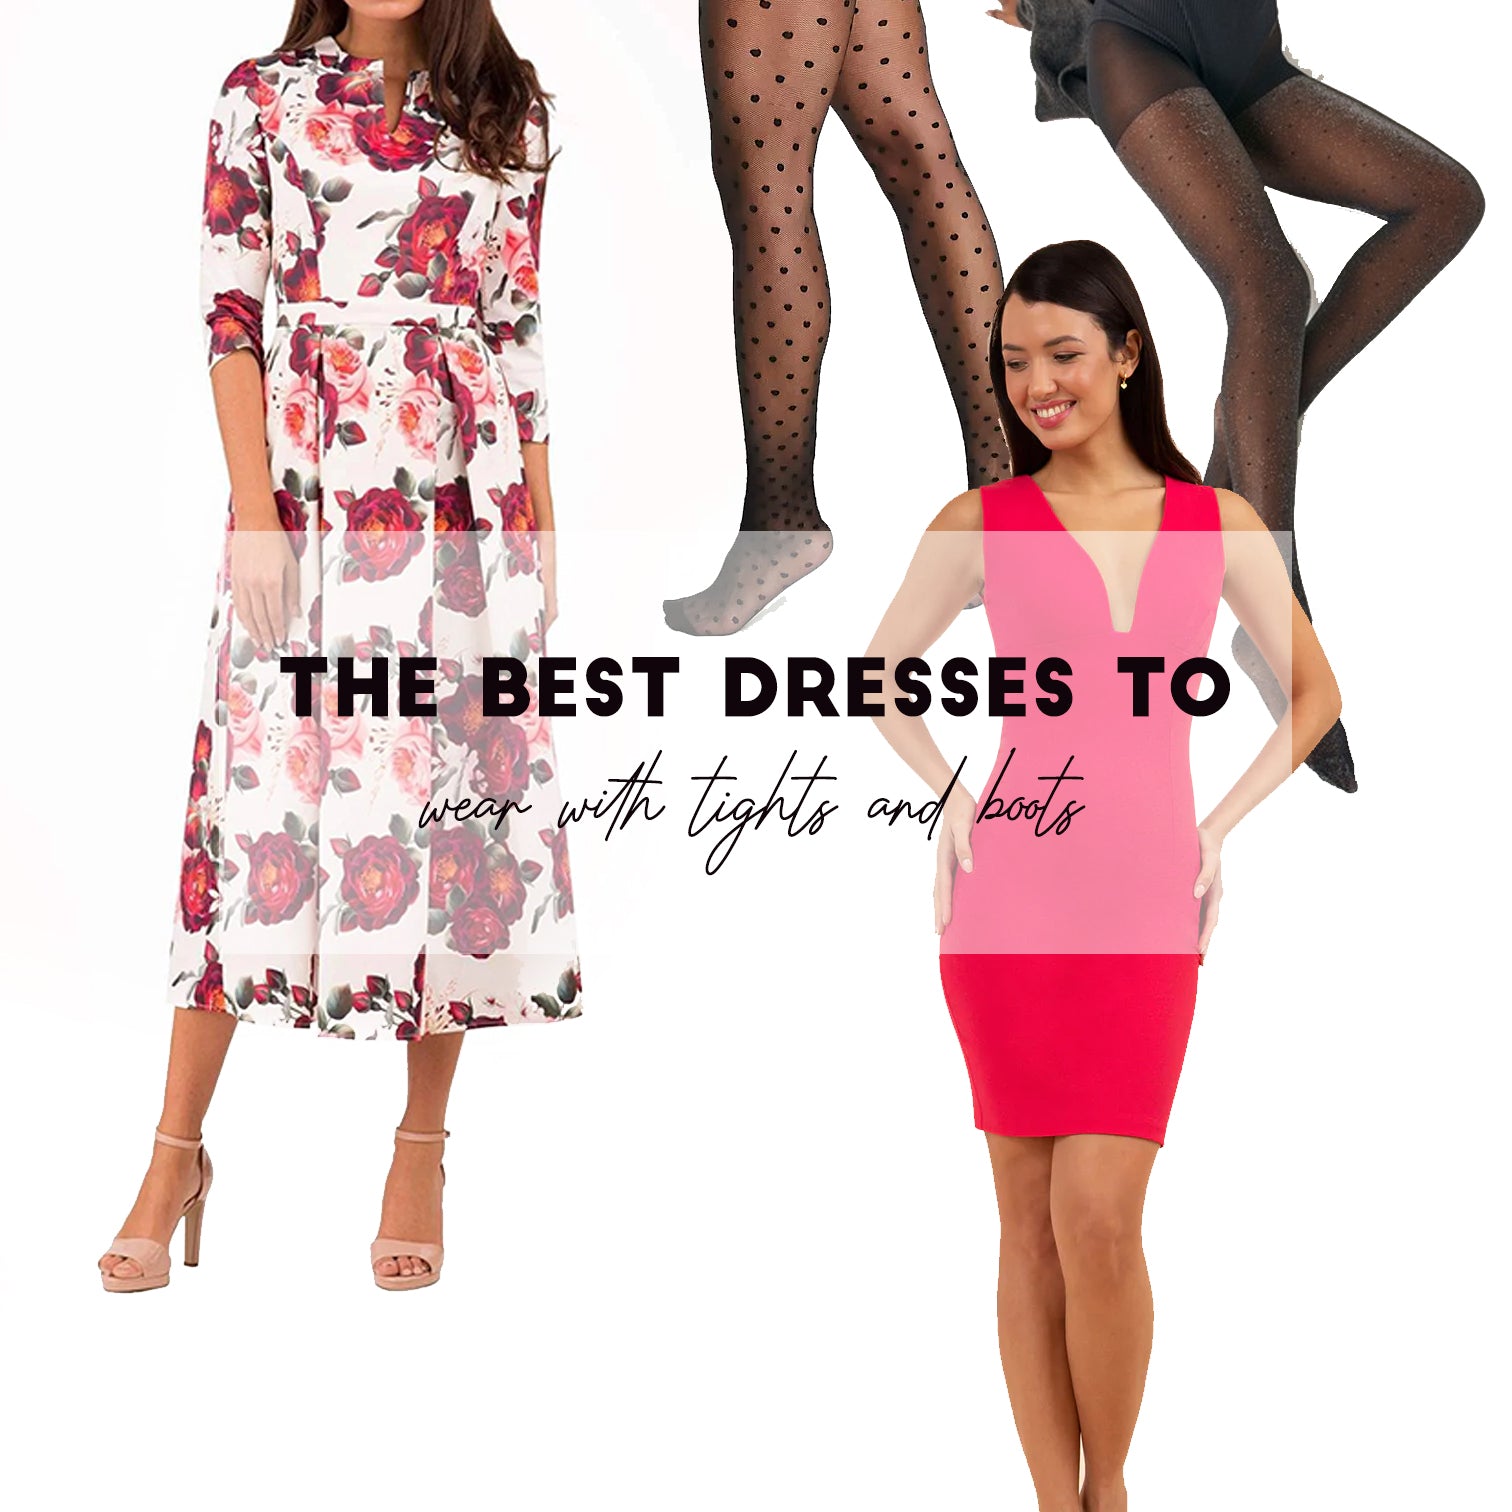 Best dresses to wear with tights